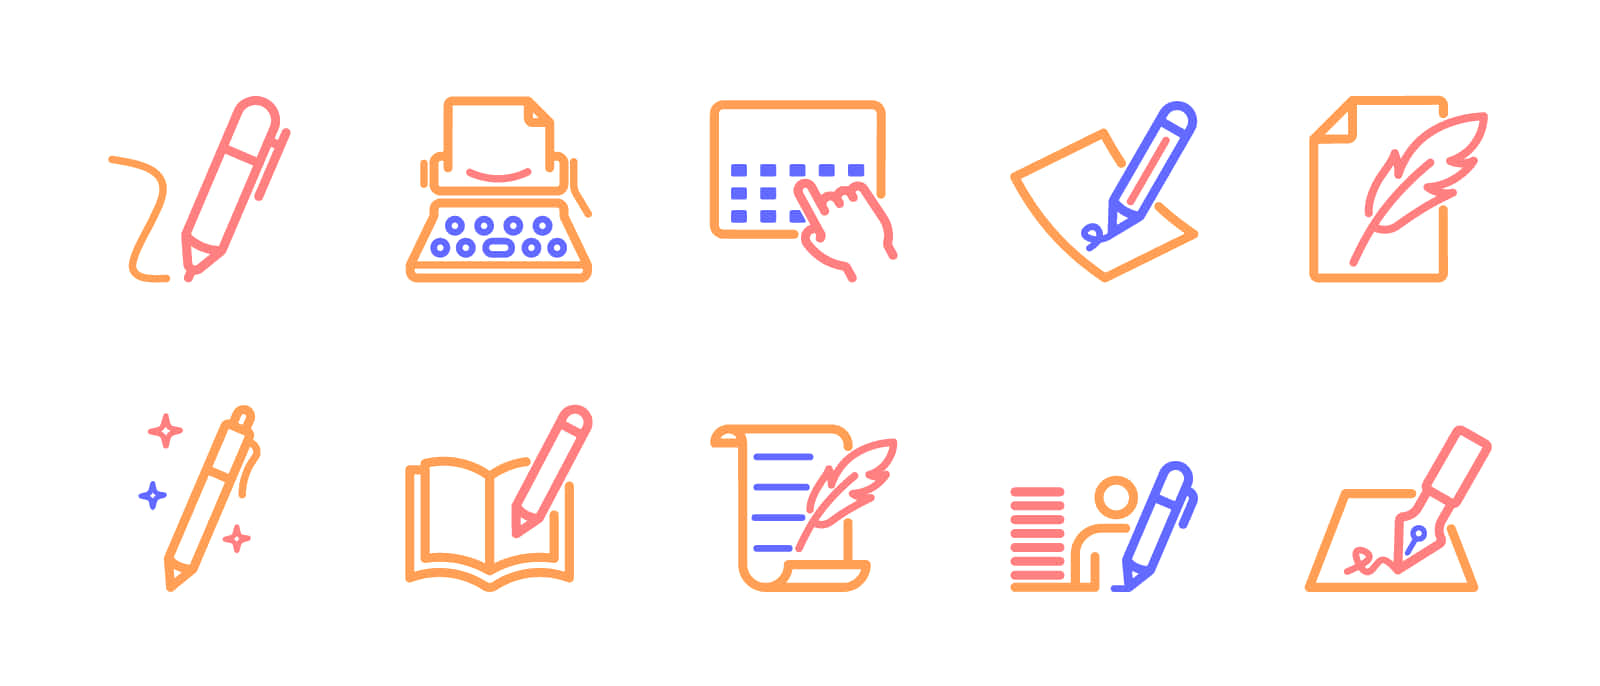 A Set Of Icons With Pens, Pencils, And Other Items